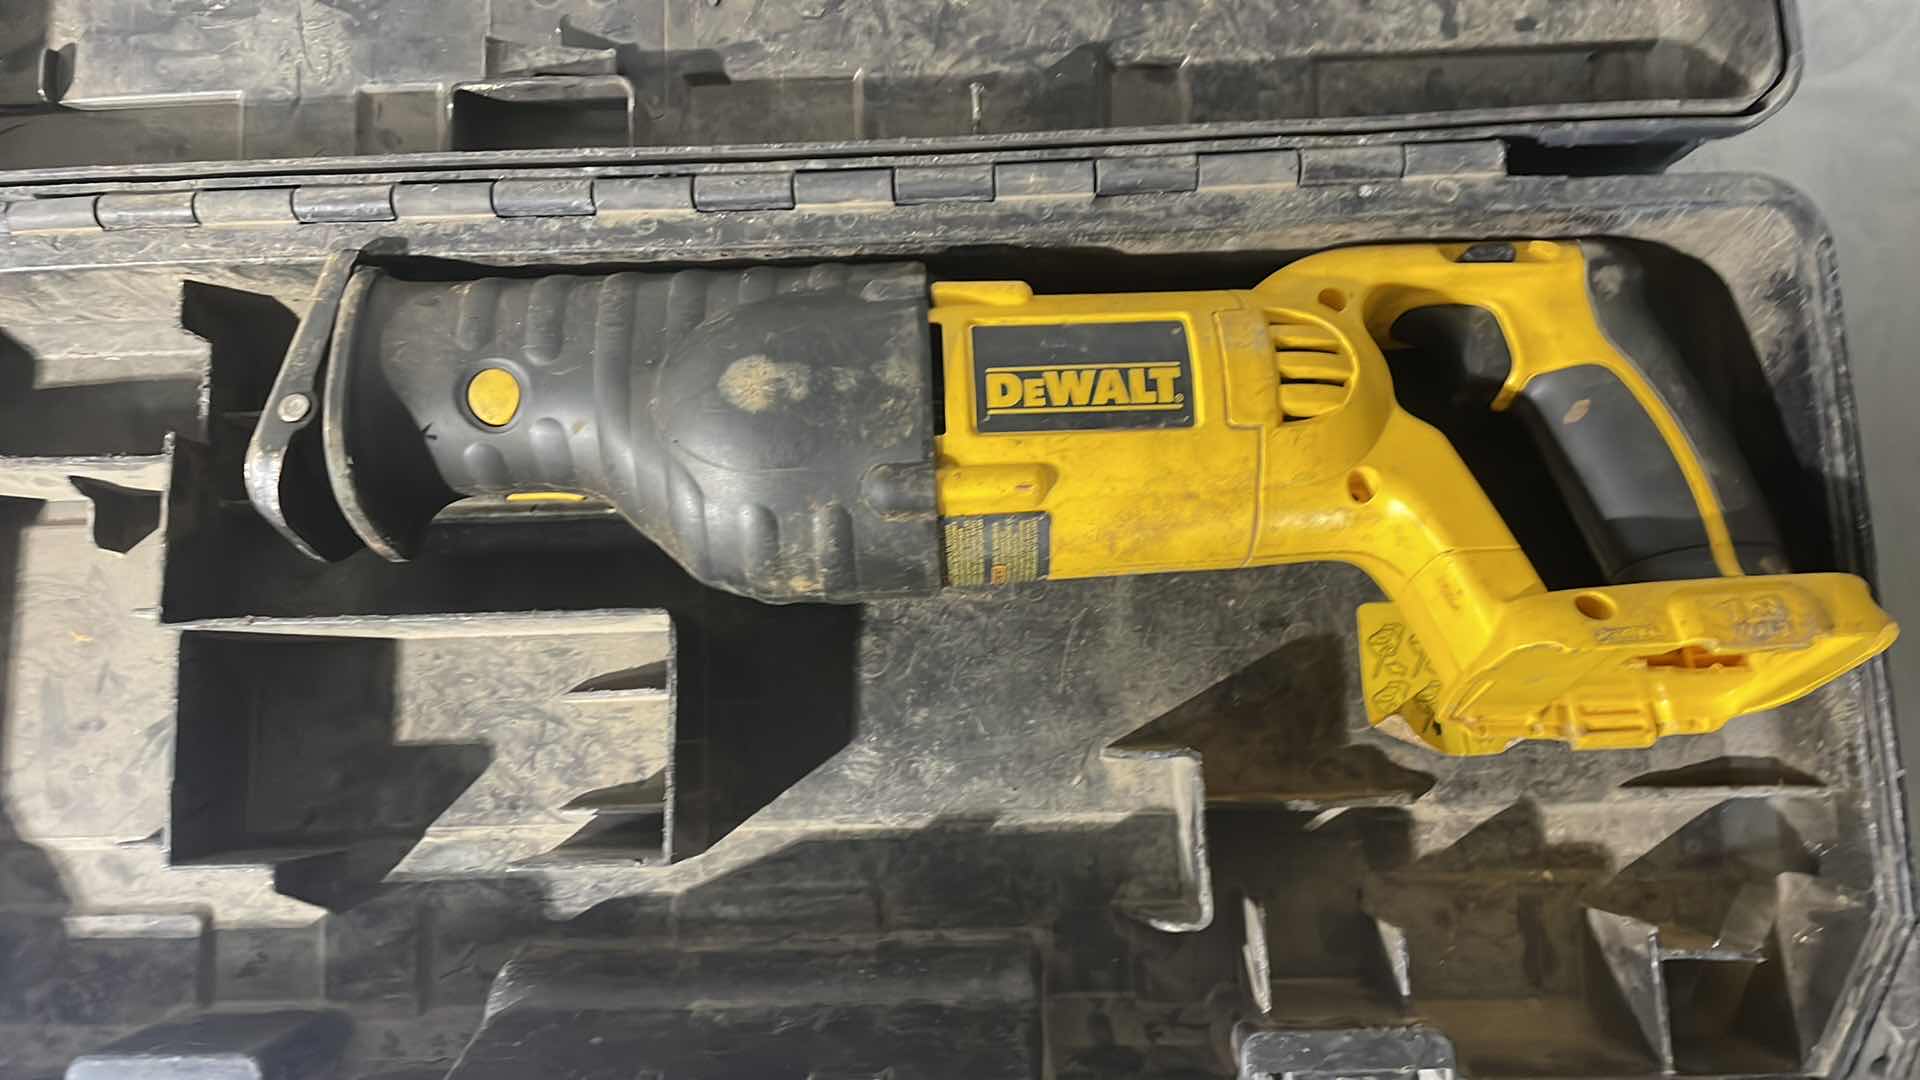 Photo 2 of DEWALT DC385 18V VARIABLE SPEED RECIPROCATING SAW IN CASE NO BATTERY TESTED WORKING